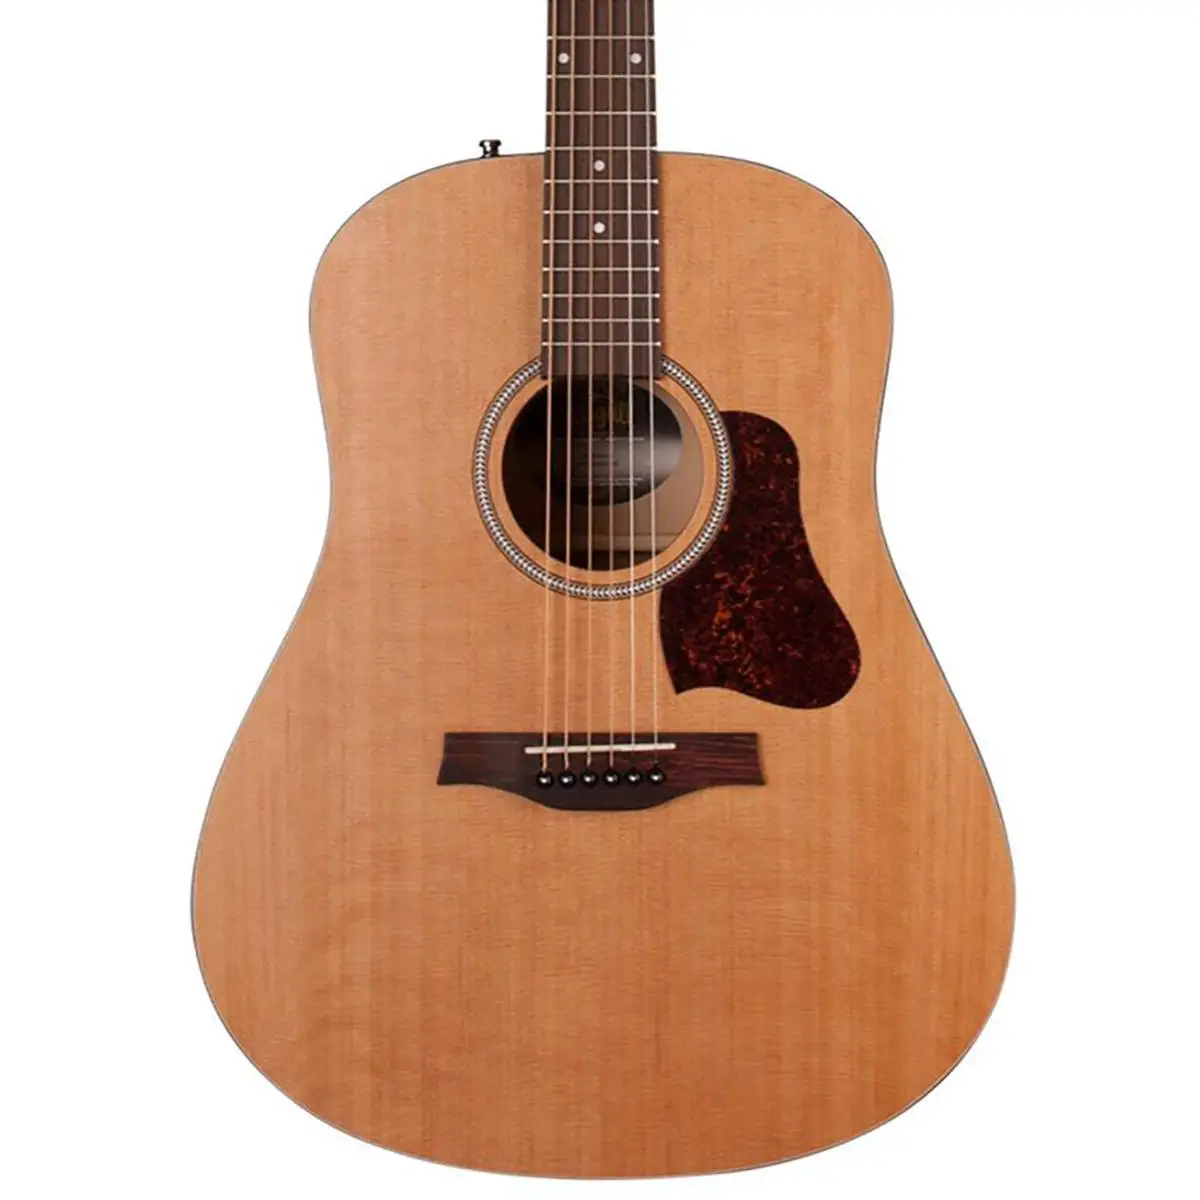 Seagull S6 Guitar Review: Craftsmanship and Tone in Perfect Harmony